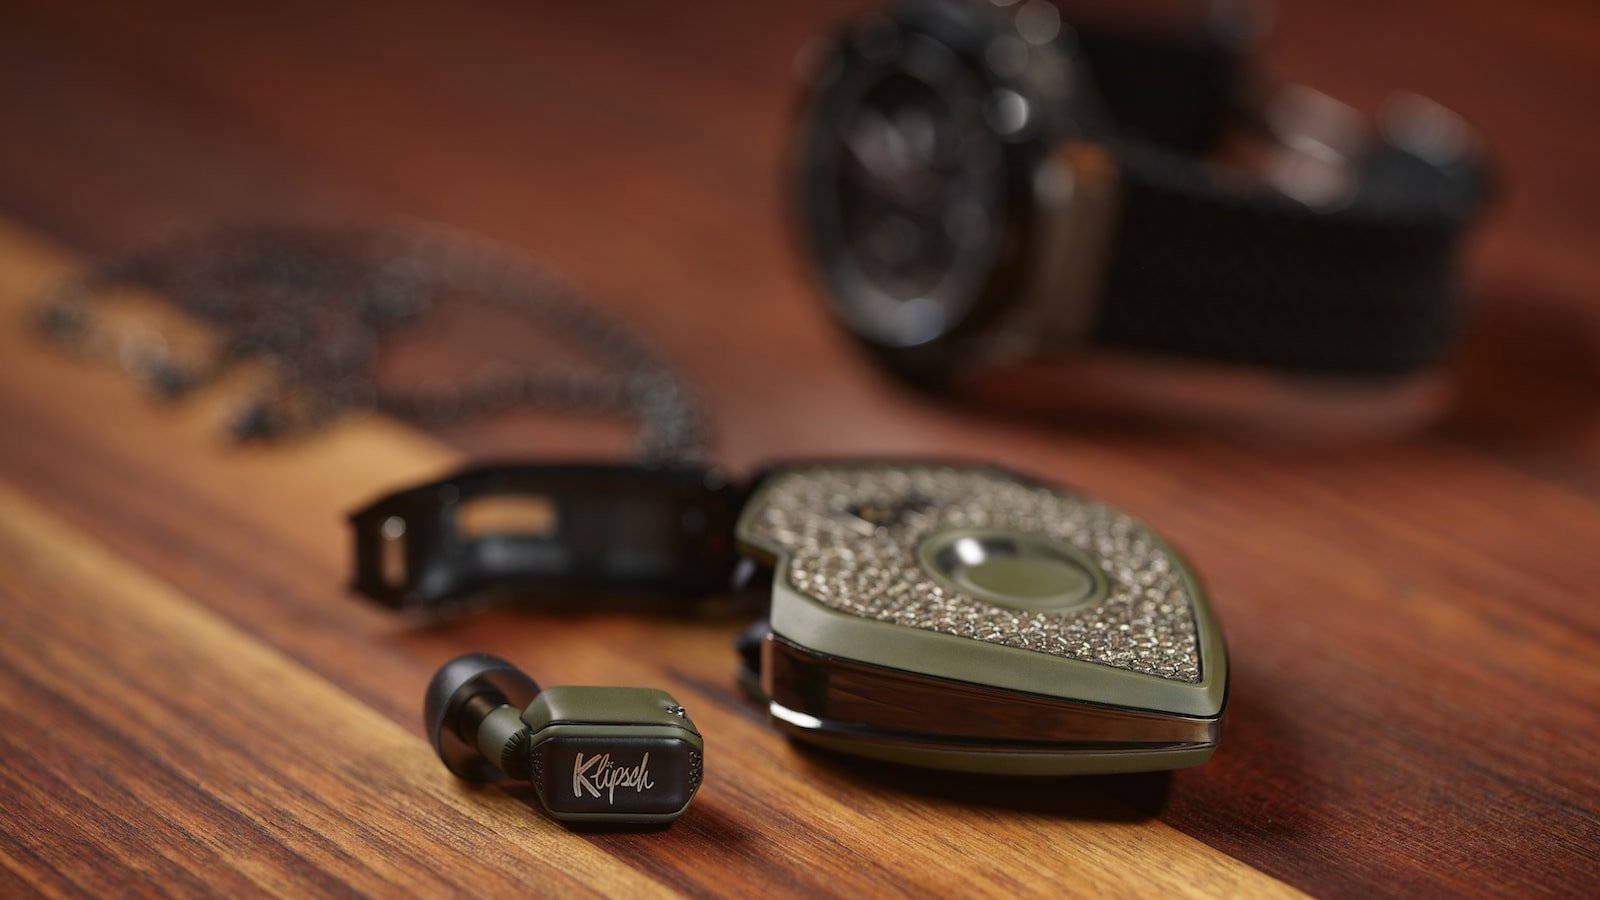 Klipsch x EAR Micro Bespoke Edition T10 elegant earbuds are sustainable and hand-built